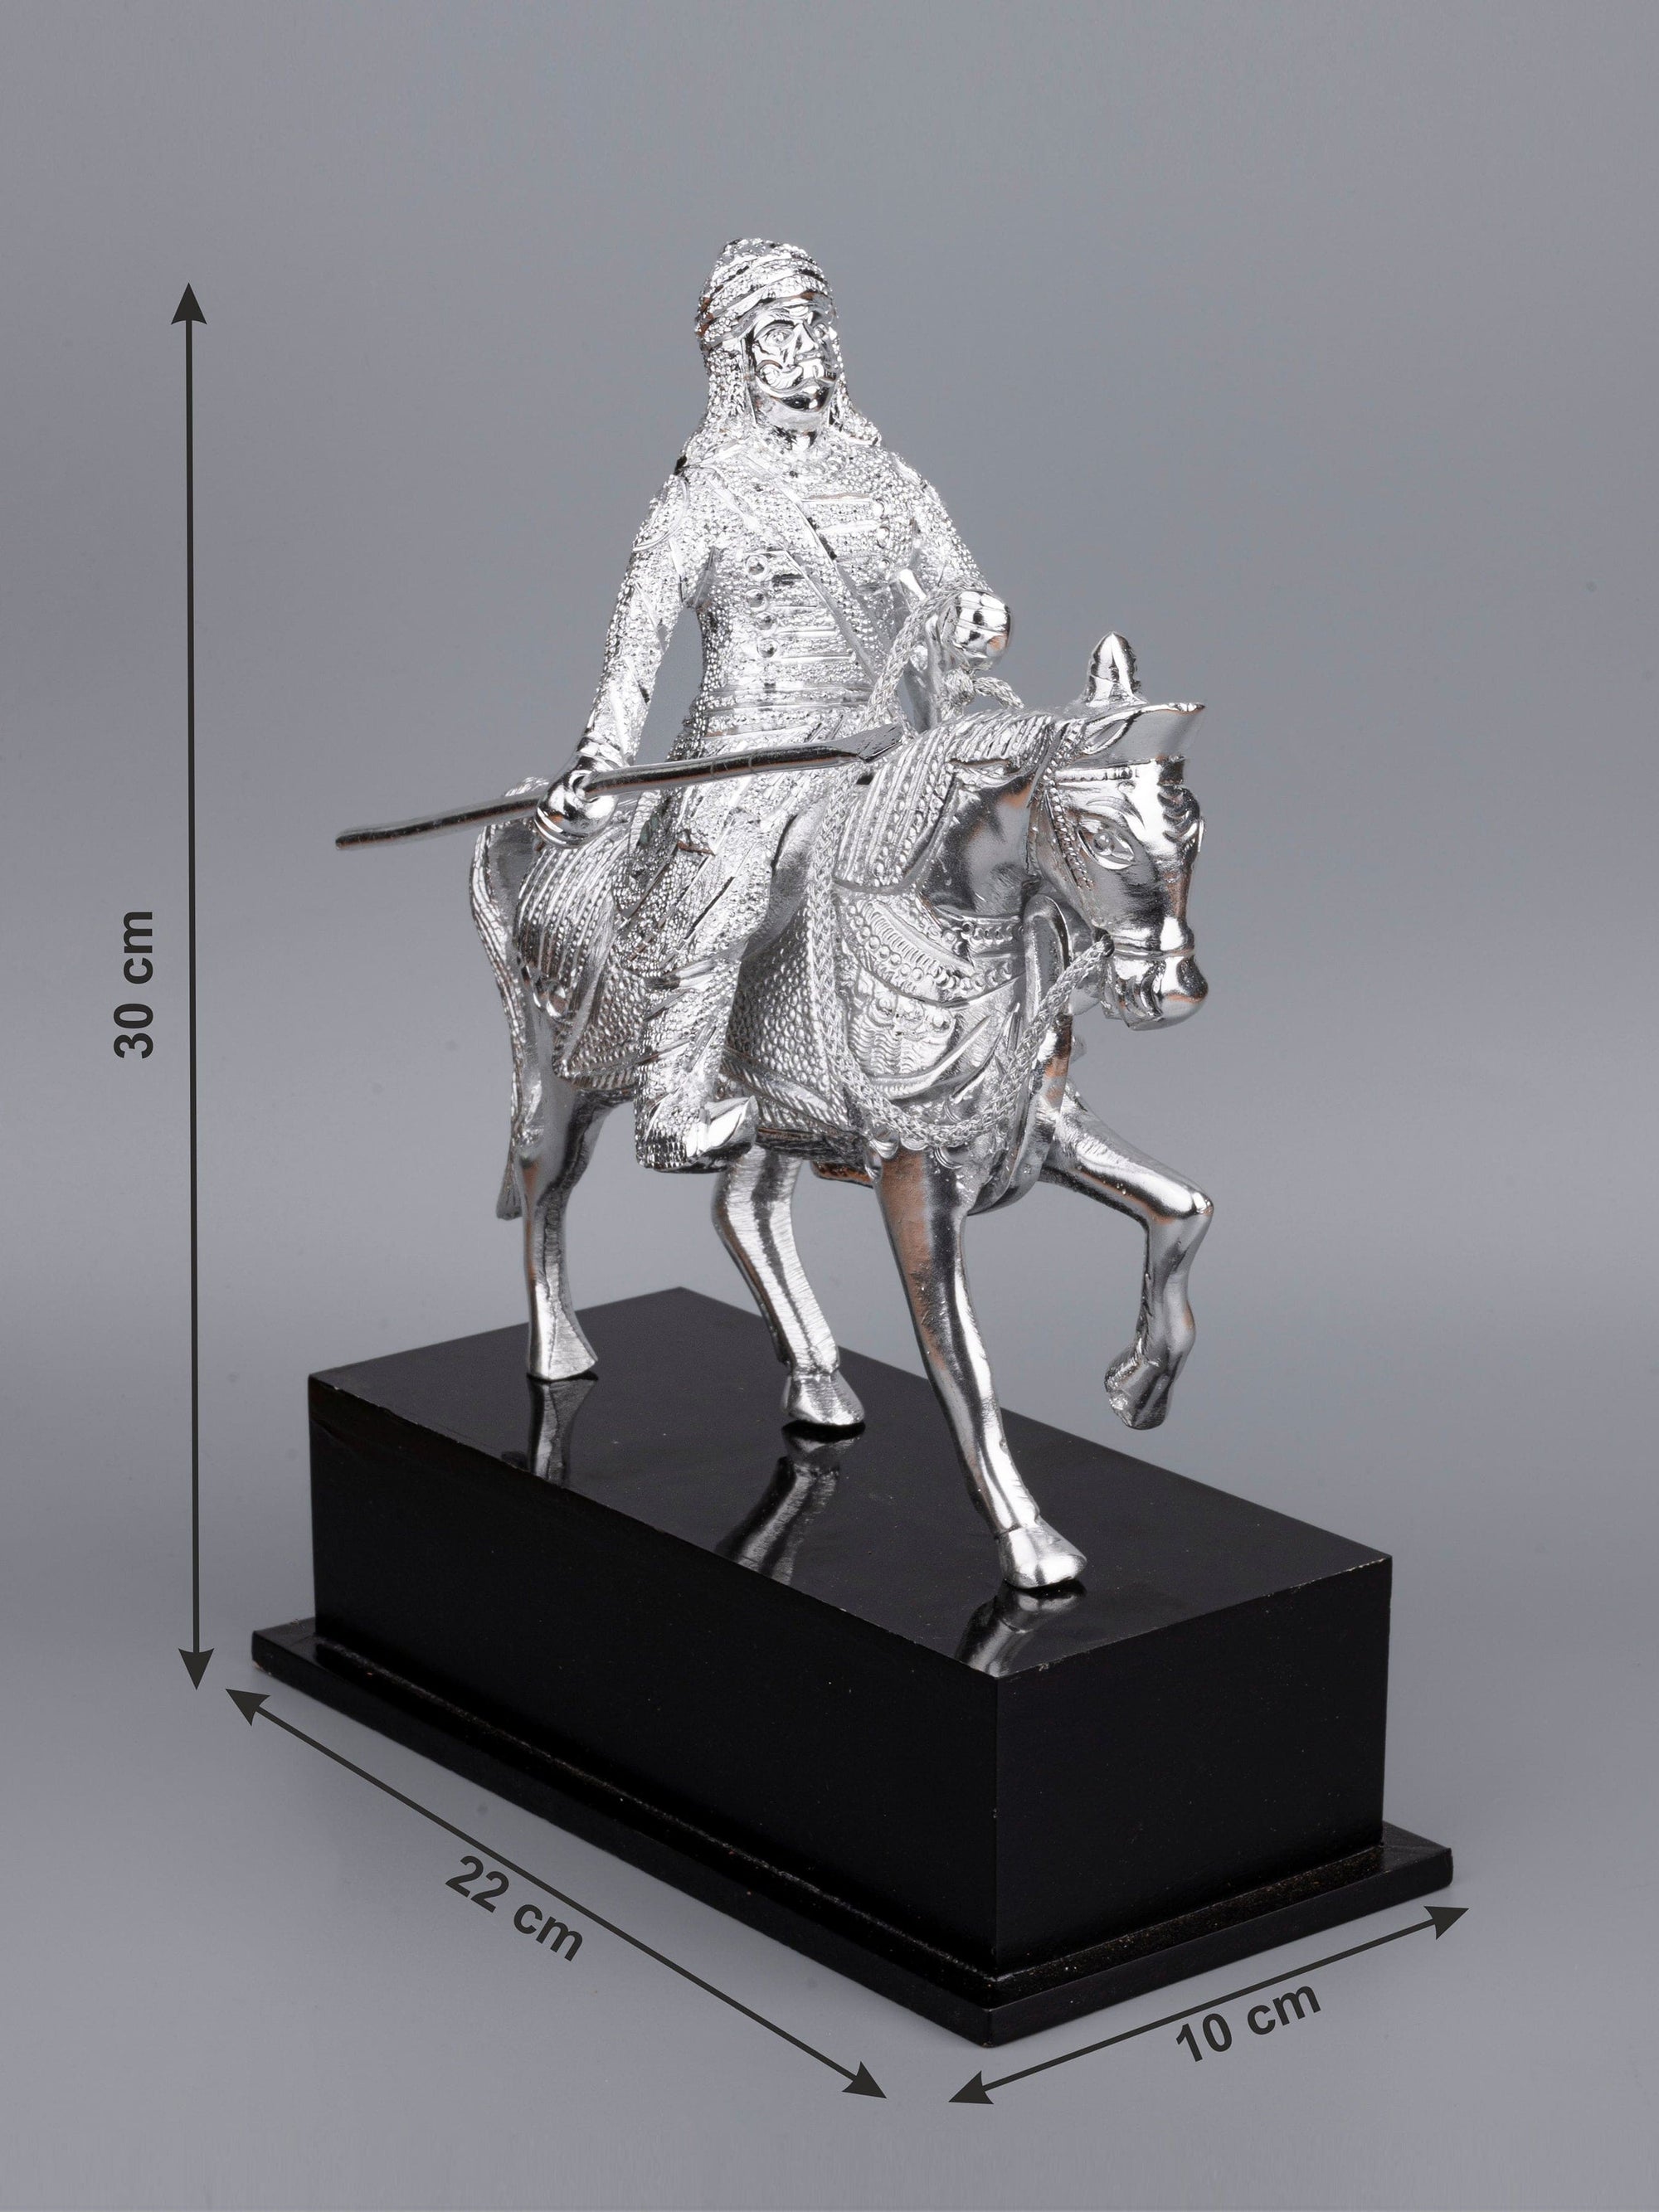 Zinc Metal Handcrafted King Maharana Pratap Figurine Riding on a Horse - 12 inches height - The Heritage Artifacts